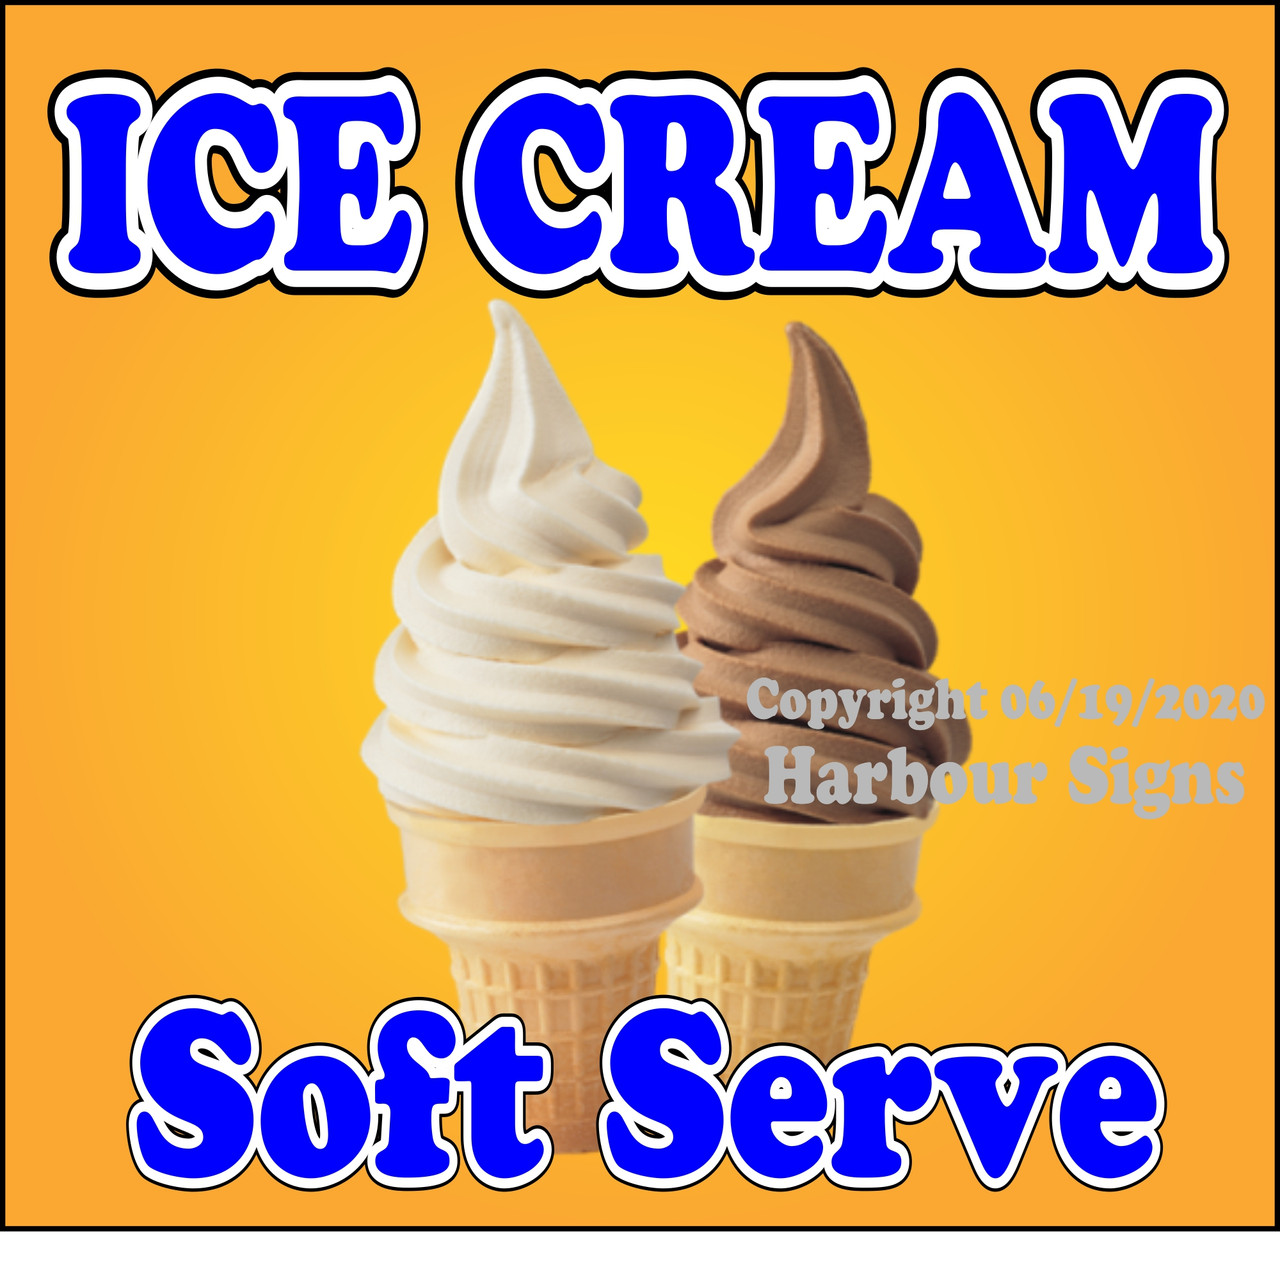 2'X5' SOFT SERVE ICE CREAM BANNER Outdoor Signs Fair Concession Stand Cones Cold 